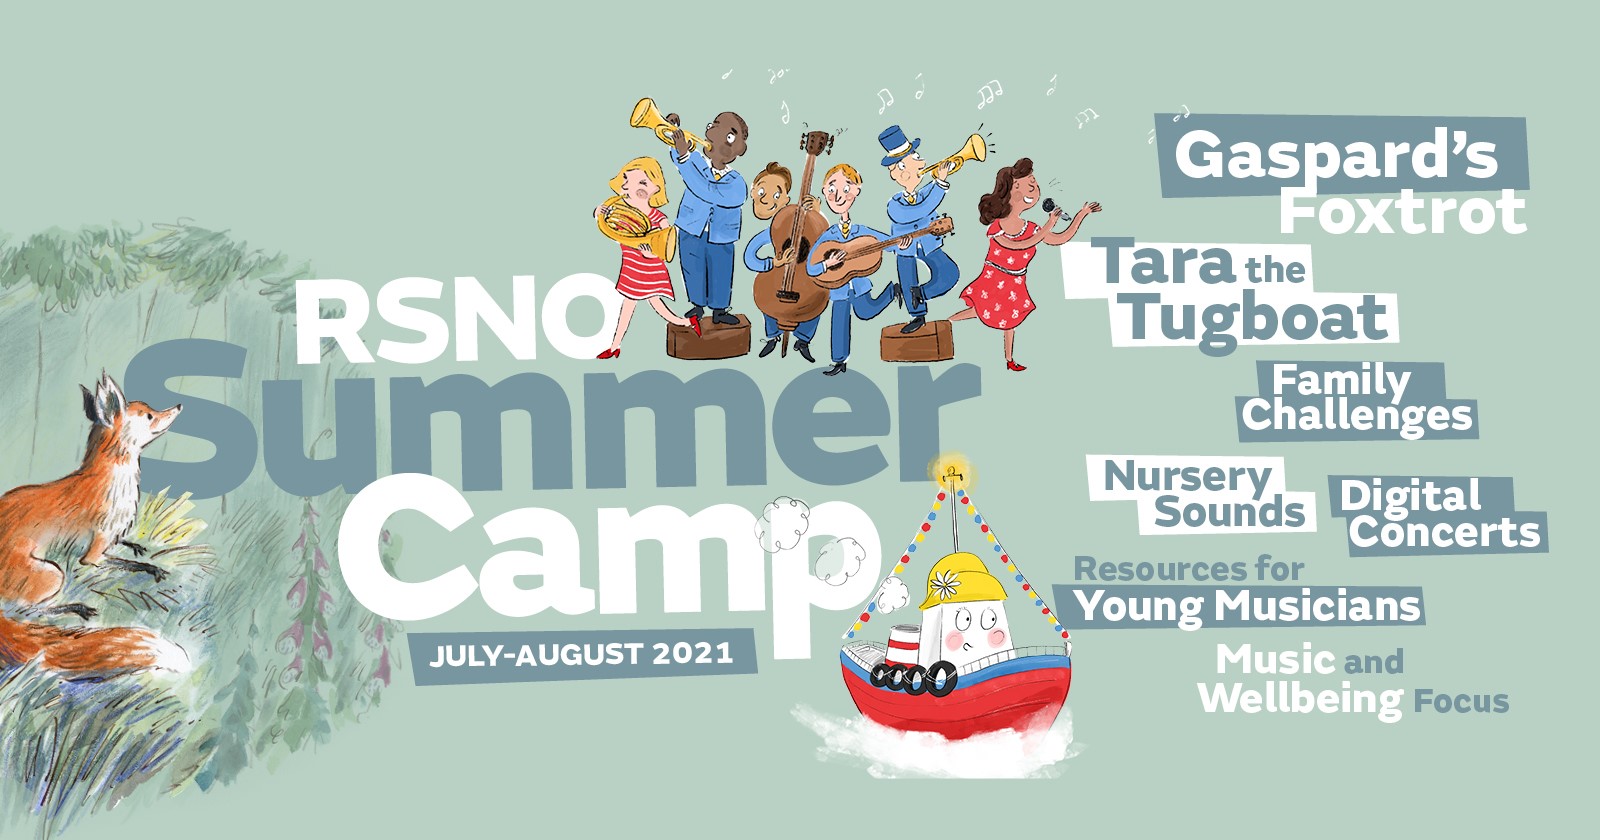 RSNO launches digital Summer Camp for children to enjoy across the school holidays